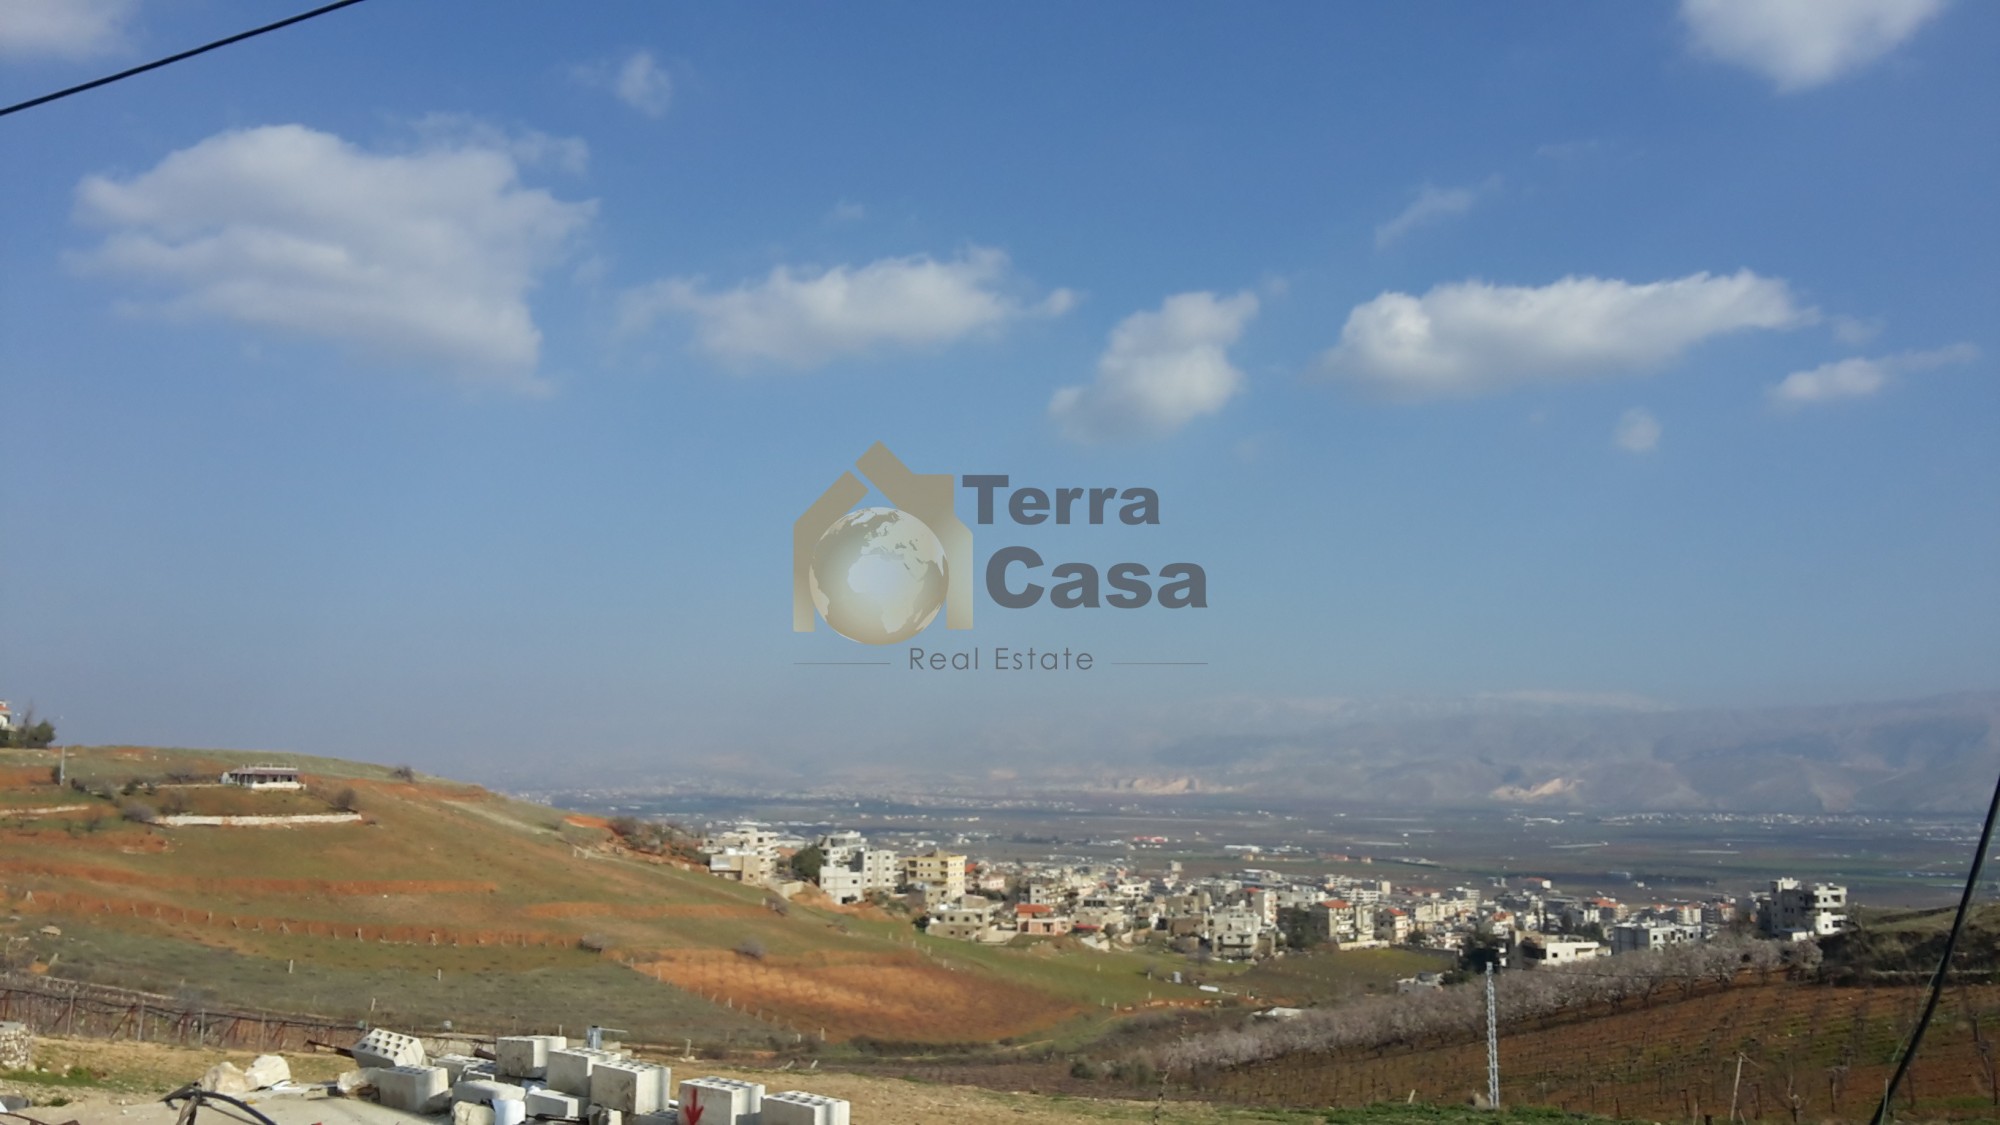 Land for sale in zahle located in a luxurious neighborhood for sale with open view